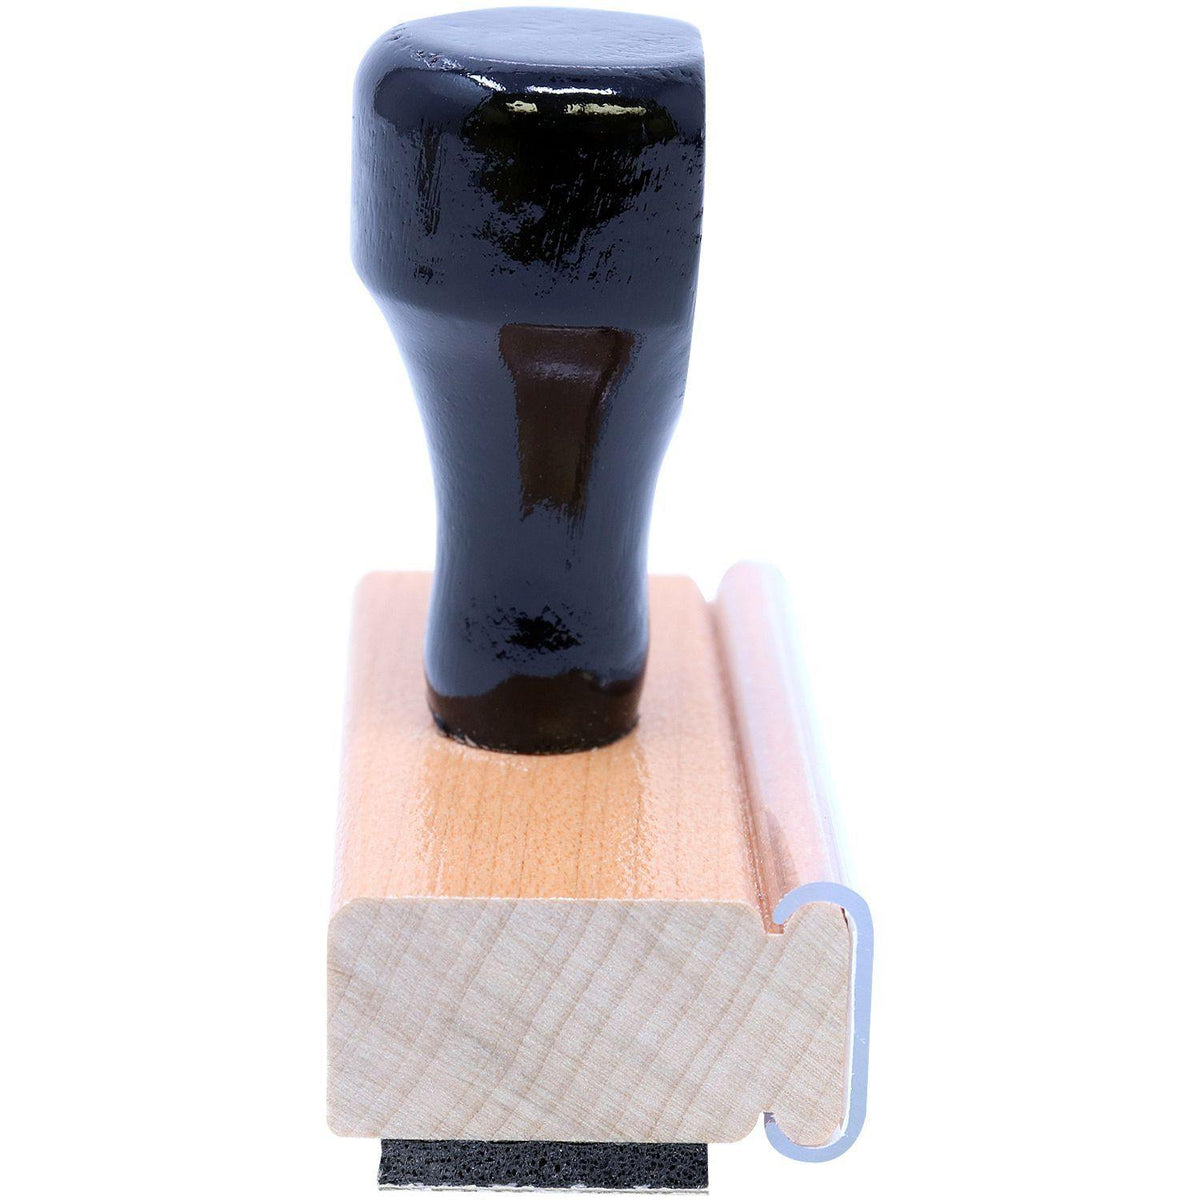 Round Recycle Rubber Stamp - Engineer Seal Stamps - Brand_Acorn, Impression Size_Small, Stamp Type_Regular Stamp, Type of Use_General